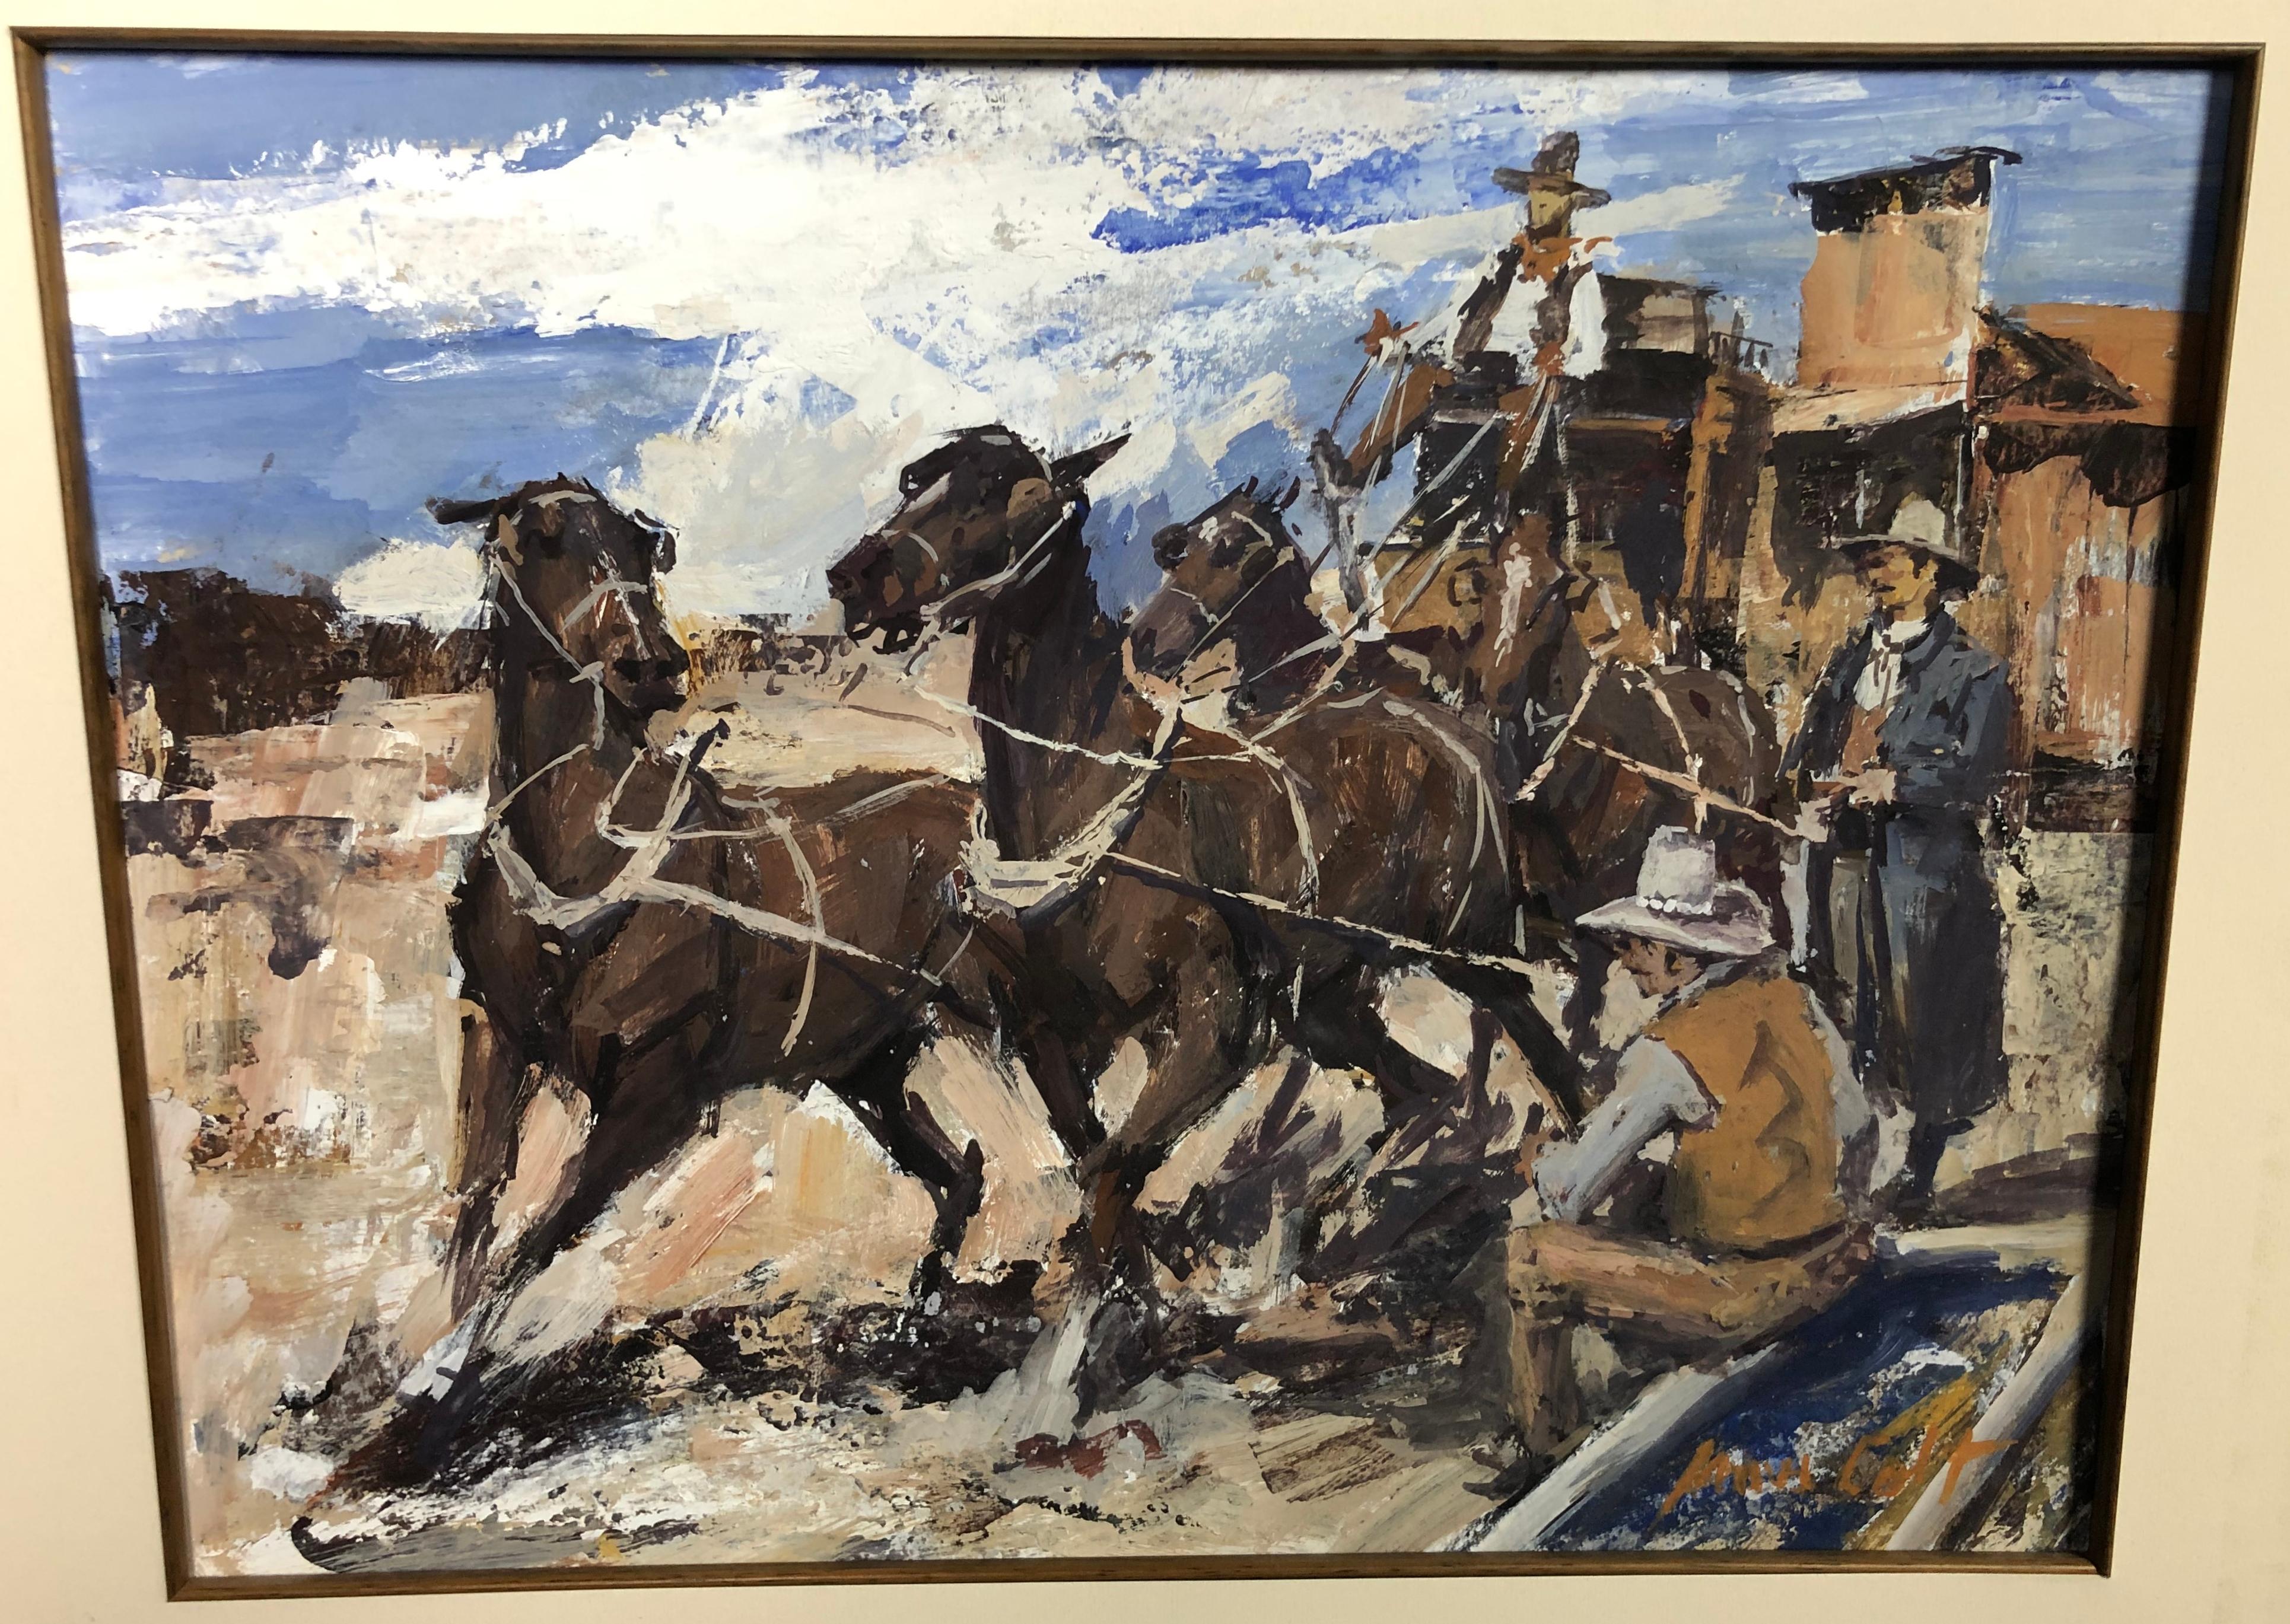 Artwork by American Western artist James Lee Colt (1922-2005 Palm Springs, CA)
Original signed gouache watercolor painting featuring cowboy stagecoach scene by American Western Artist James Colt.
Titled 